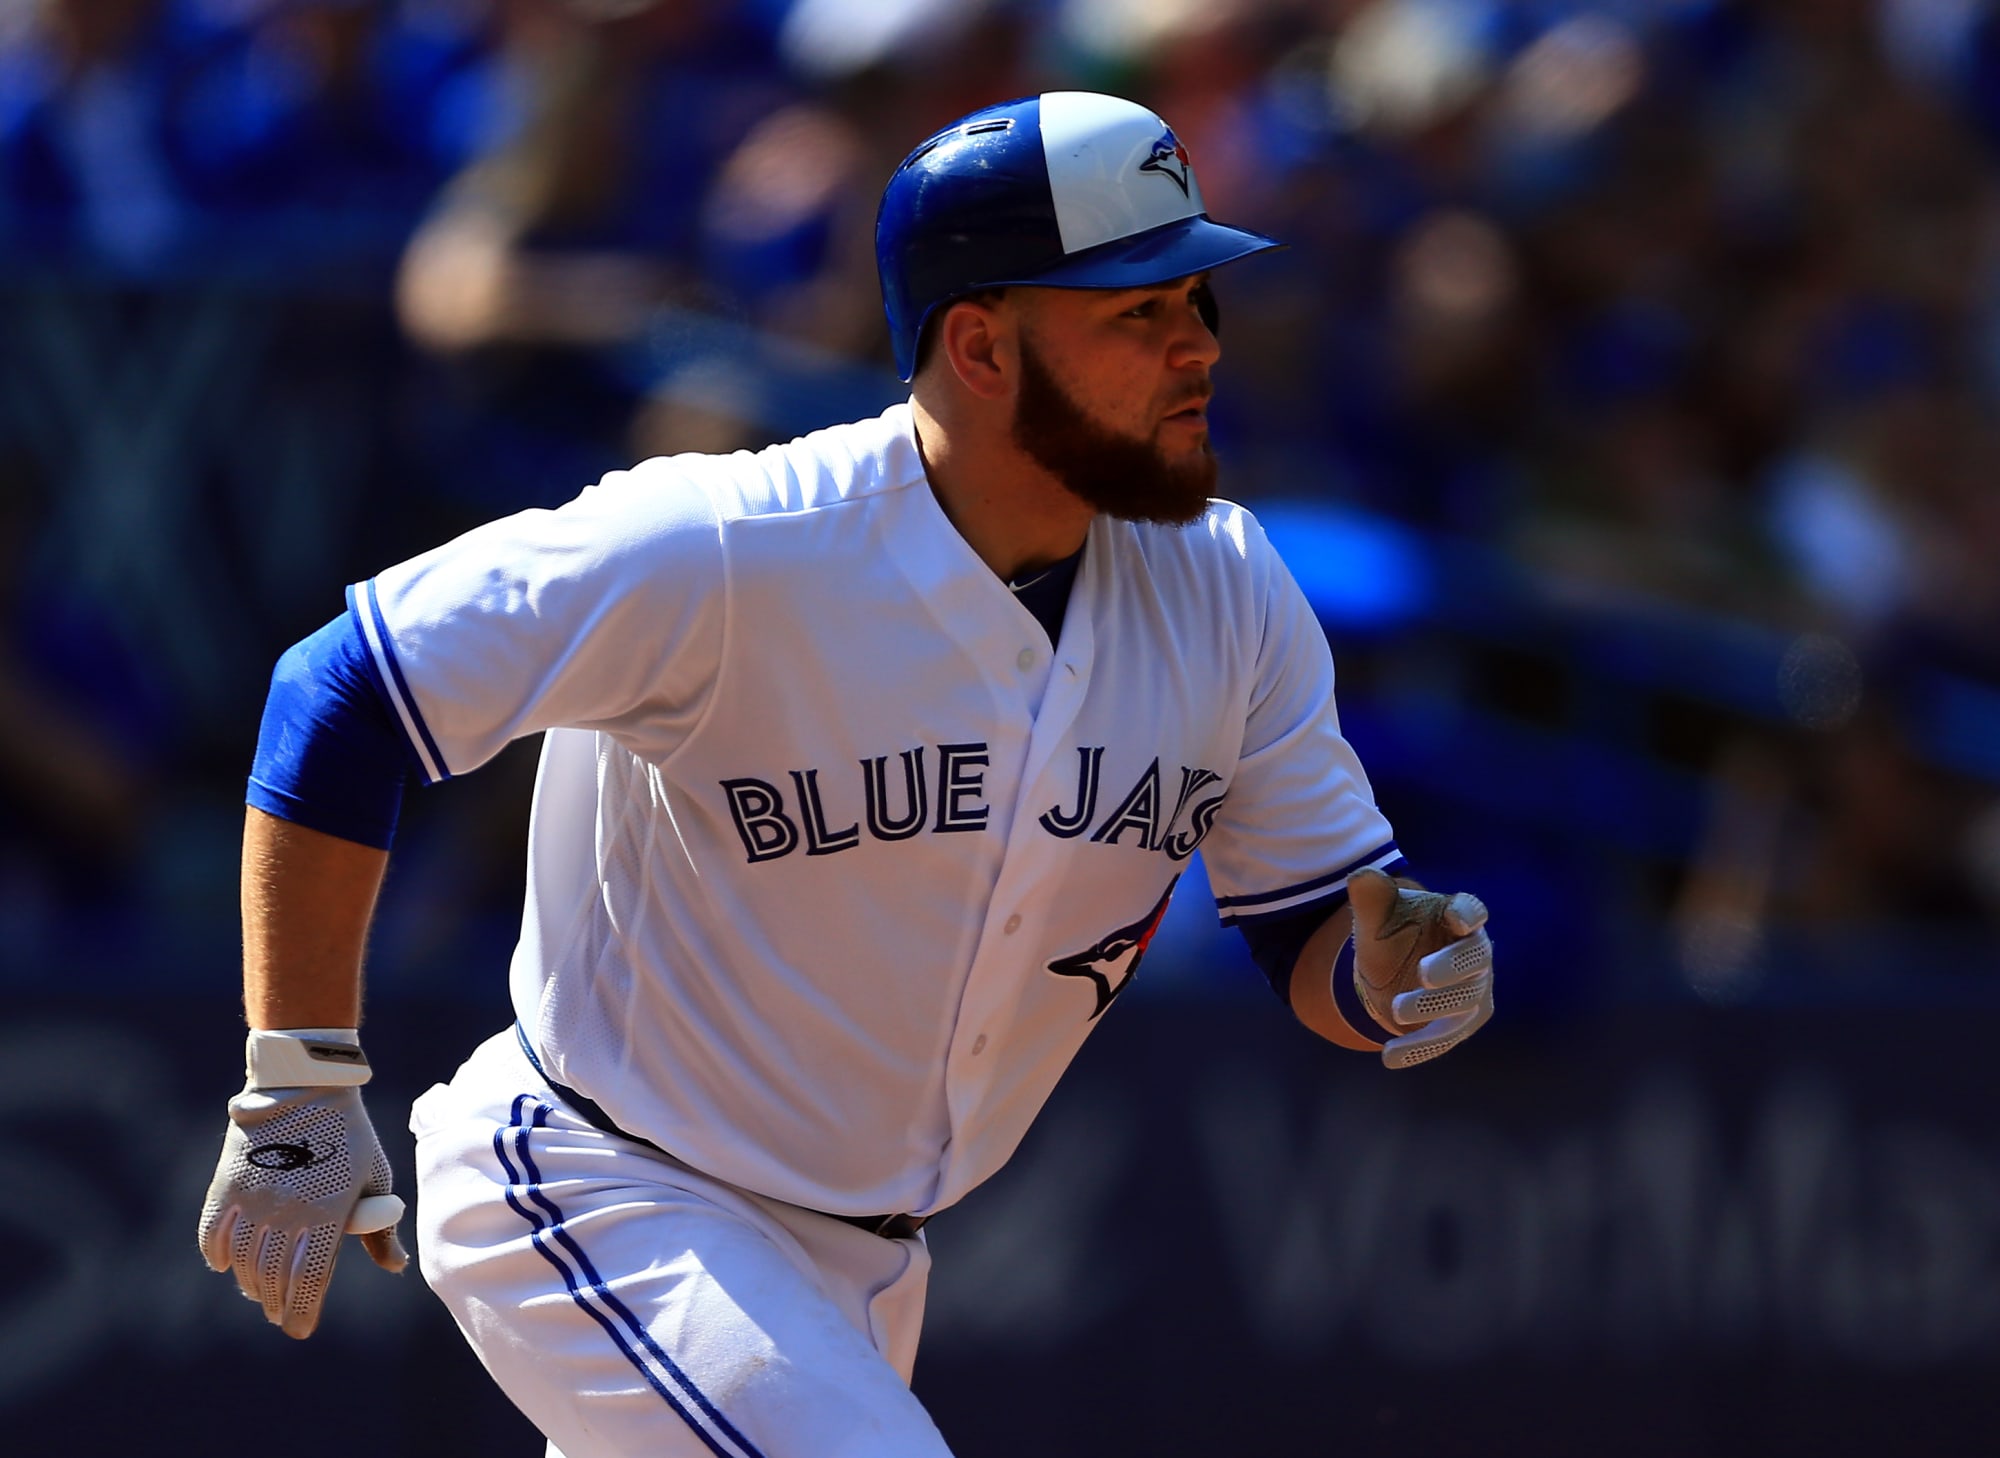 Blue Jays Best Bang For Their Buck With The Payroll?